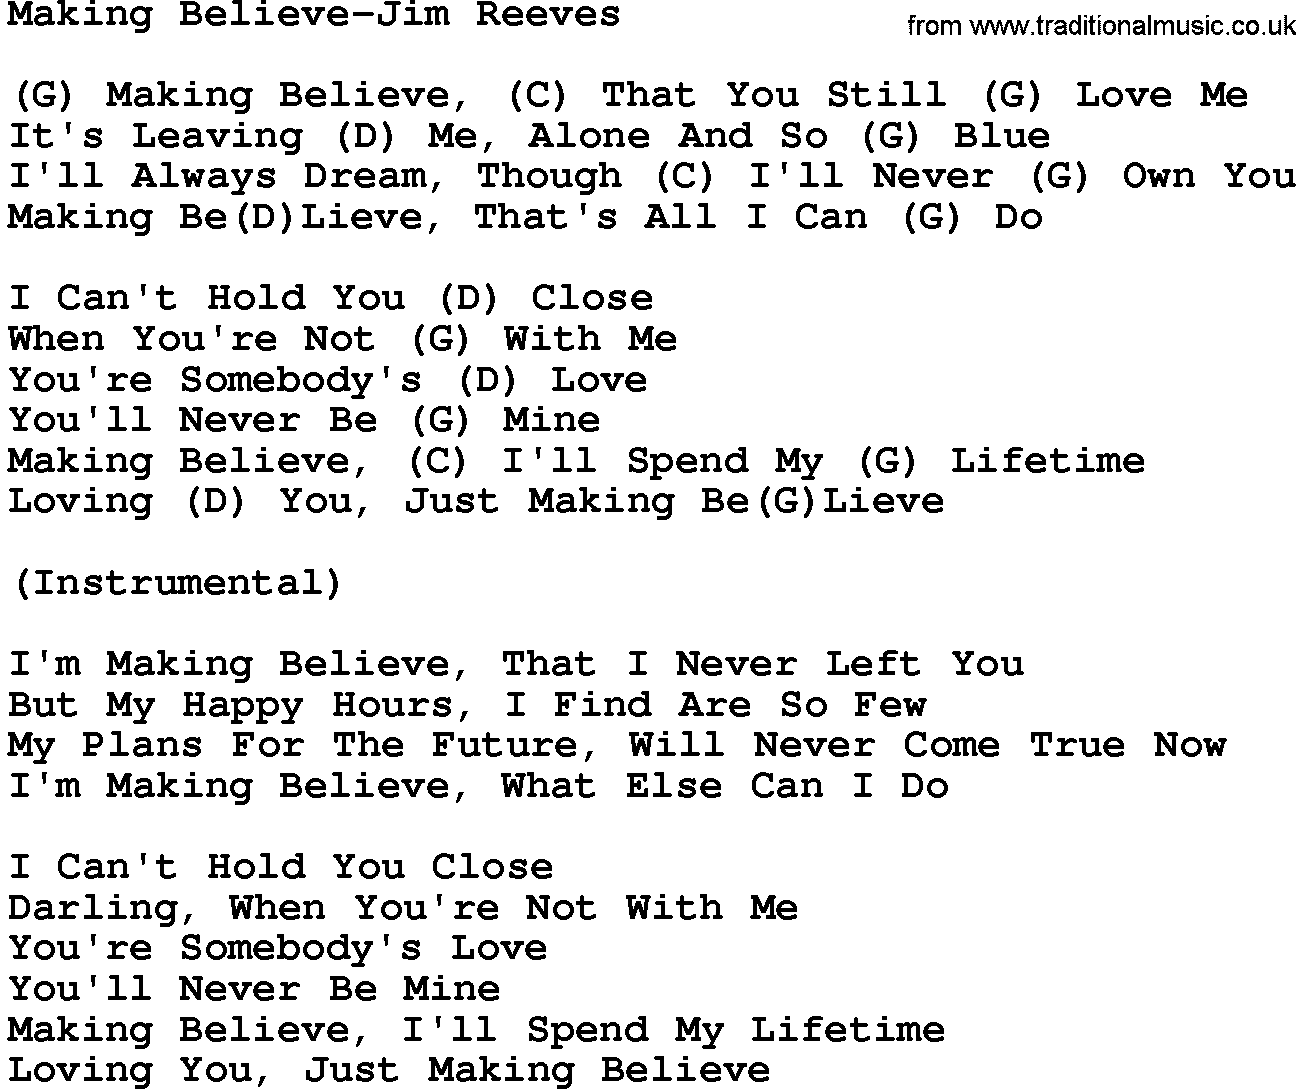 Country music song: Making Believe-Jim Reeves lyrics and chords